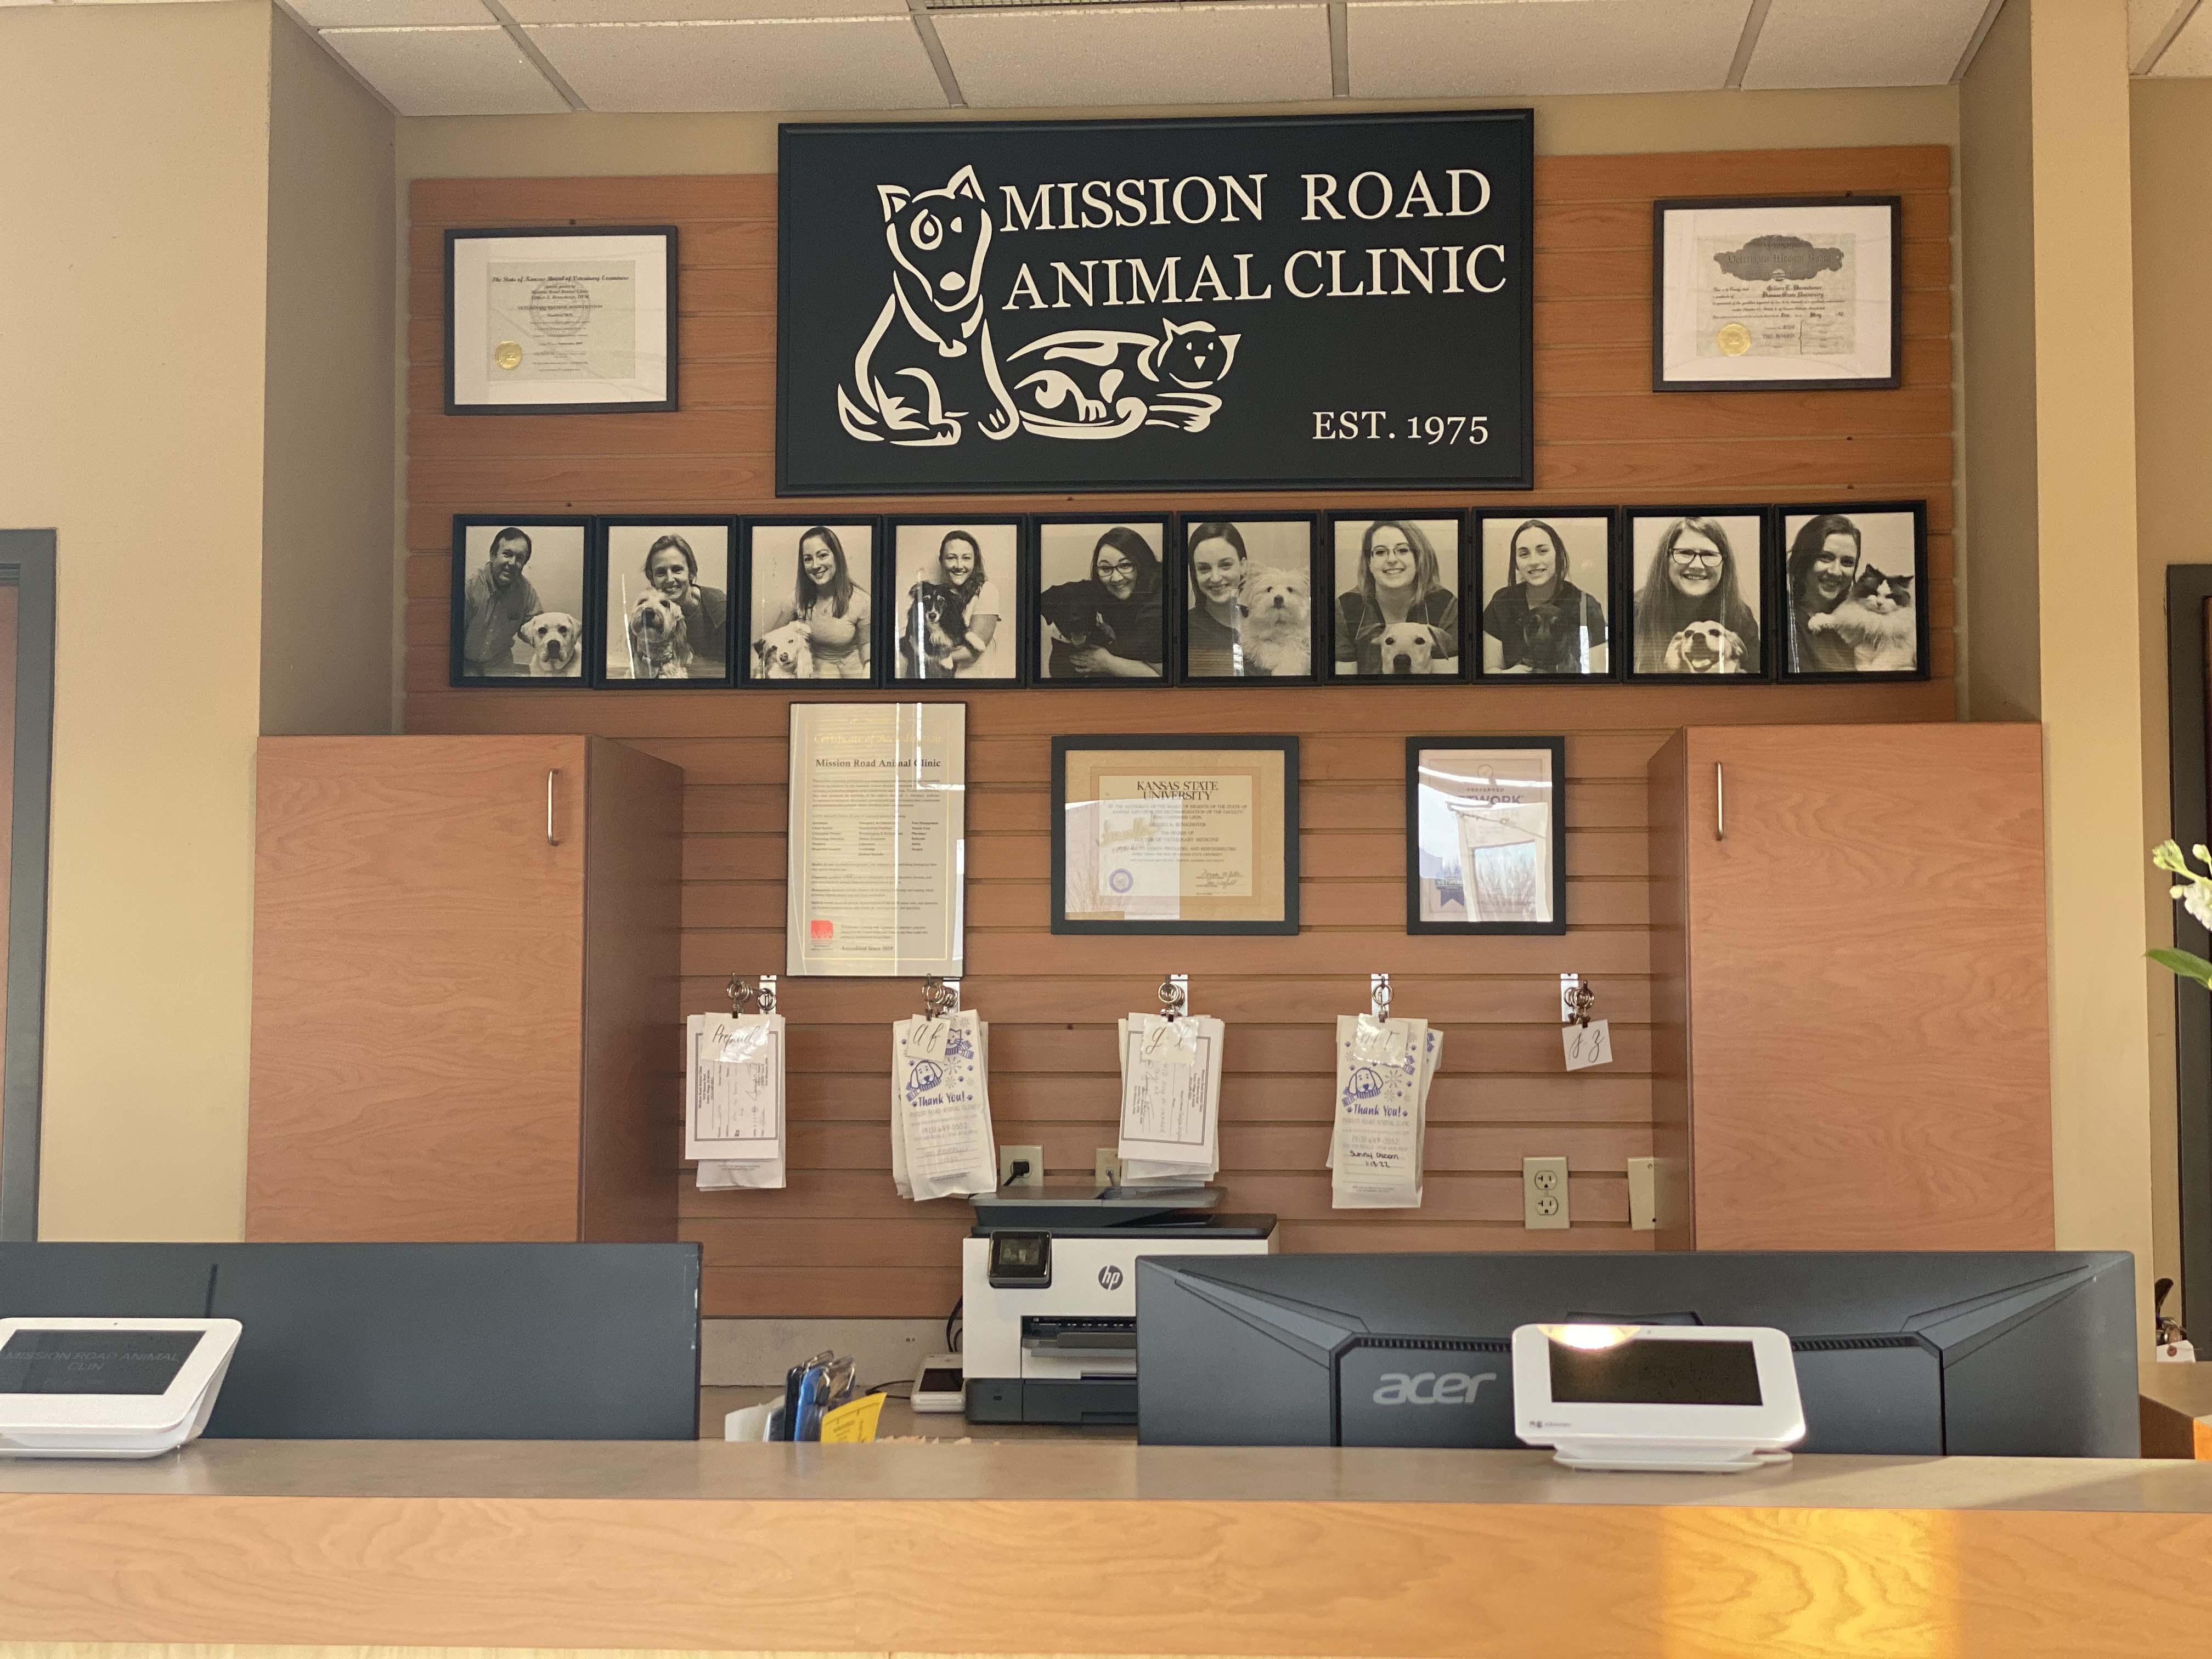 When you are looking for a veterinary clinic you should be able to count on superior care and excellent service.  At Mission Road Animal Clinic, we have assembled an expert team of veterinary professionals to bring you the best possible healthcare for your pet.